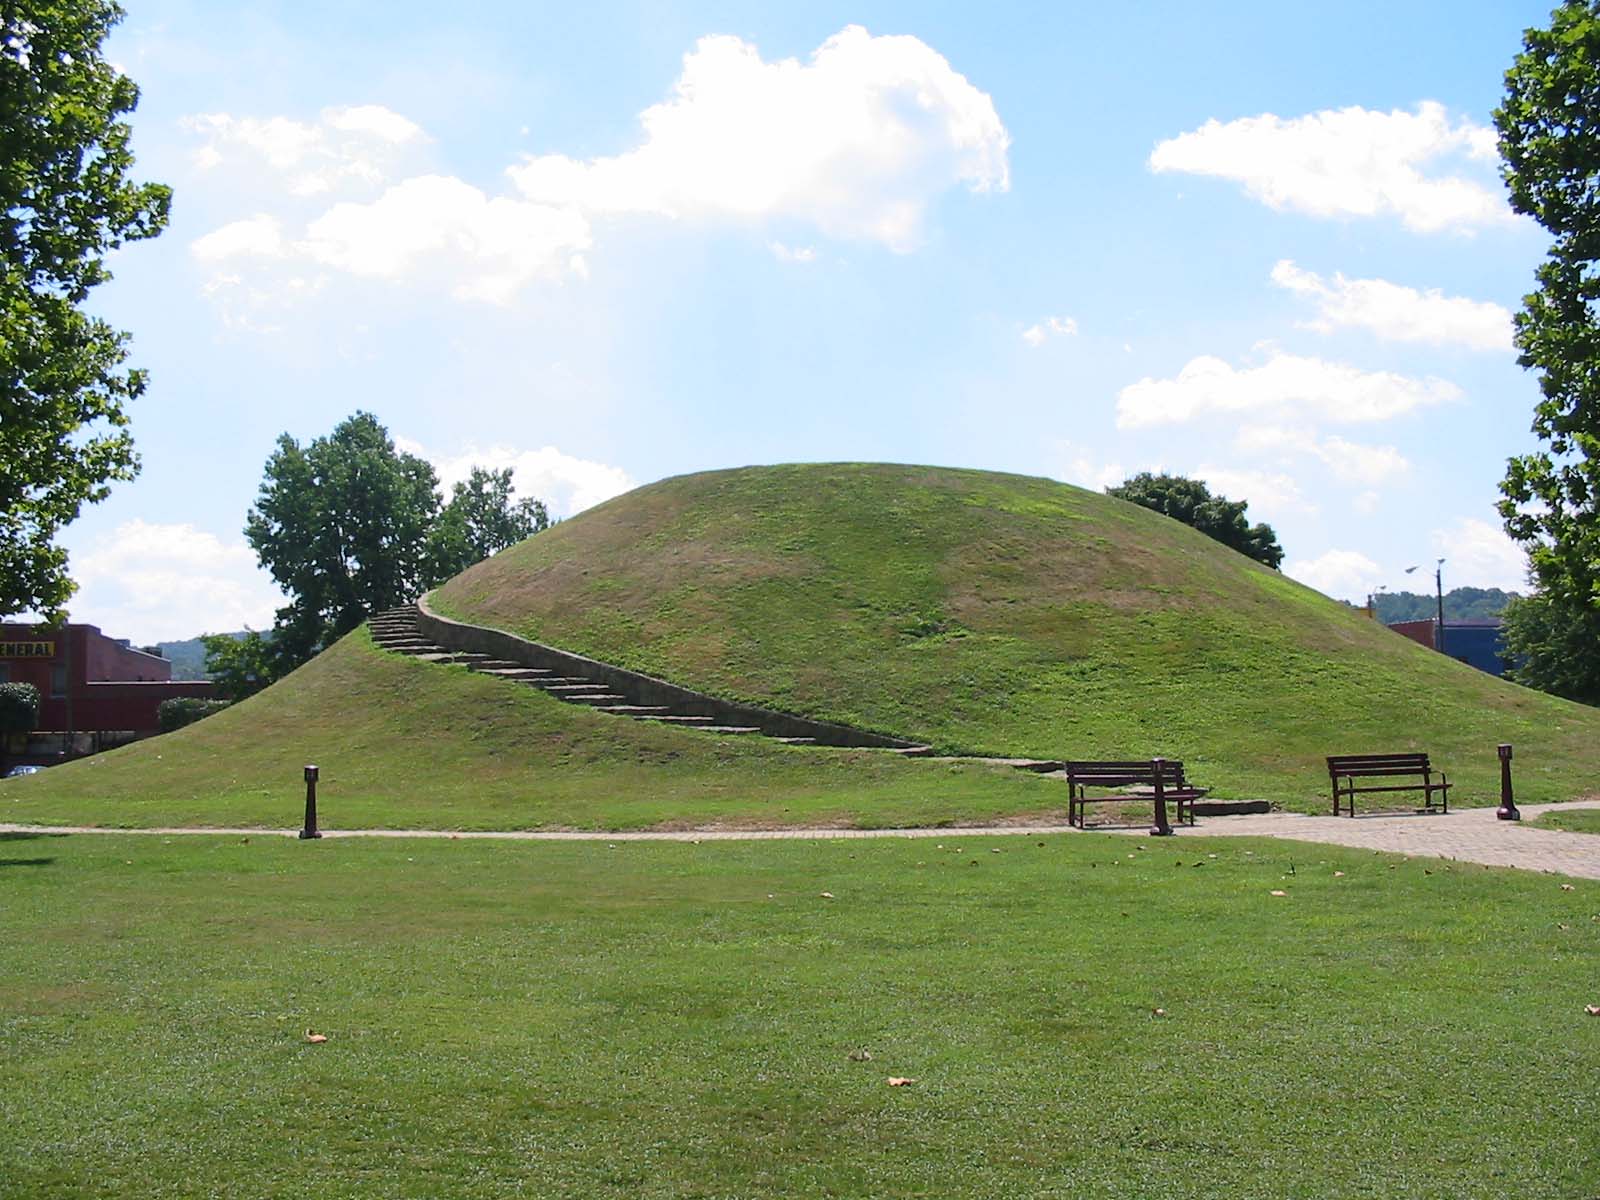 mississippian mound builders artifacts